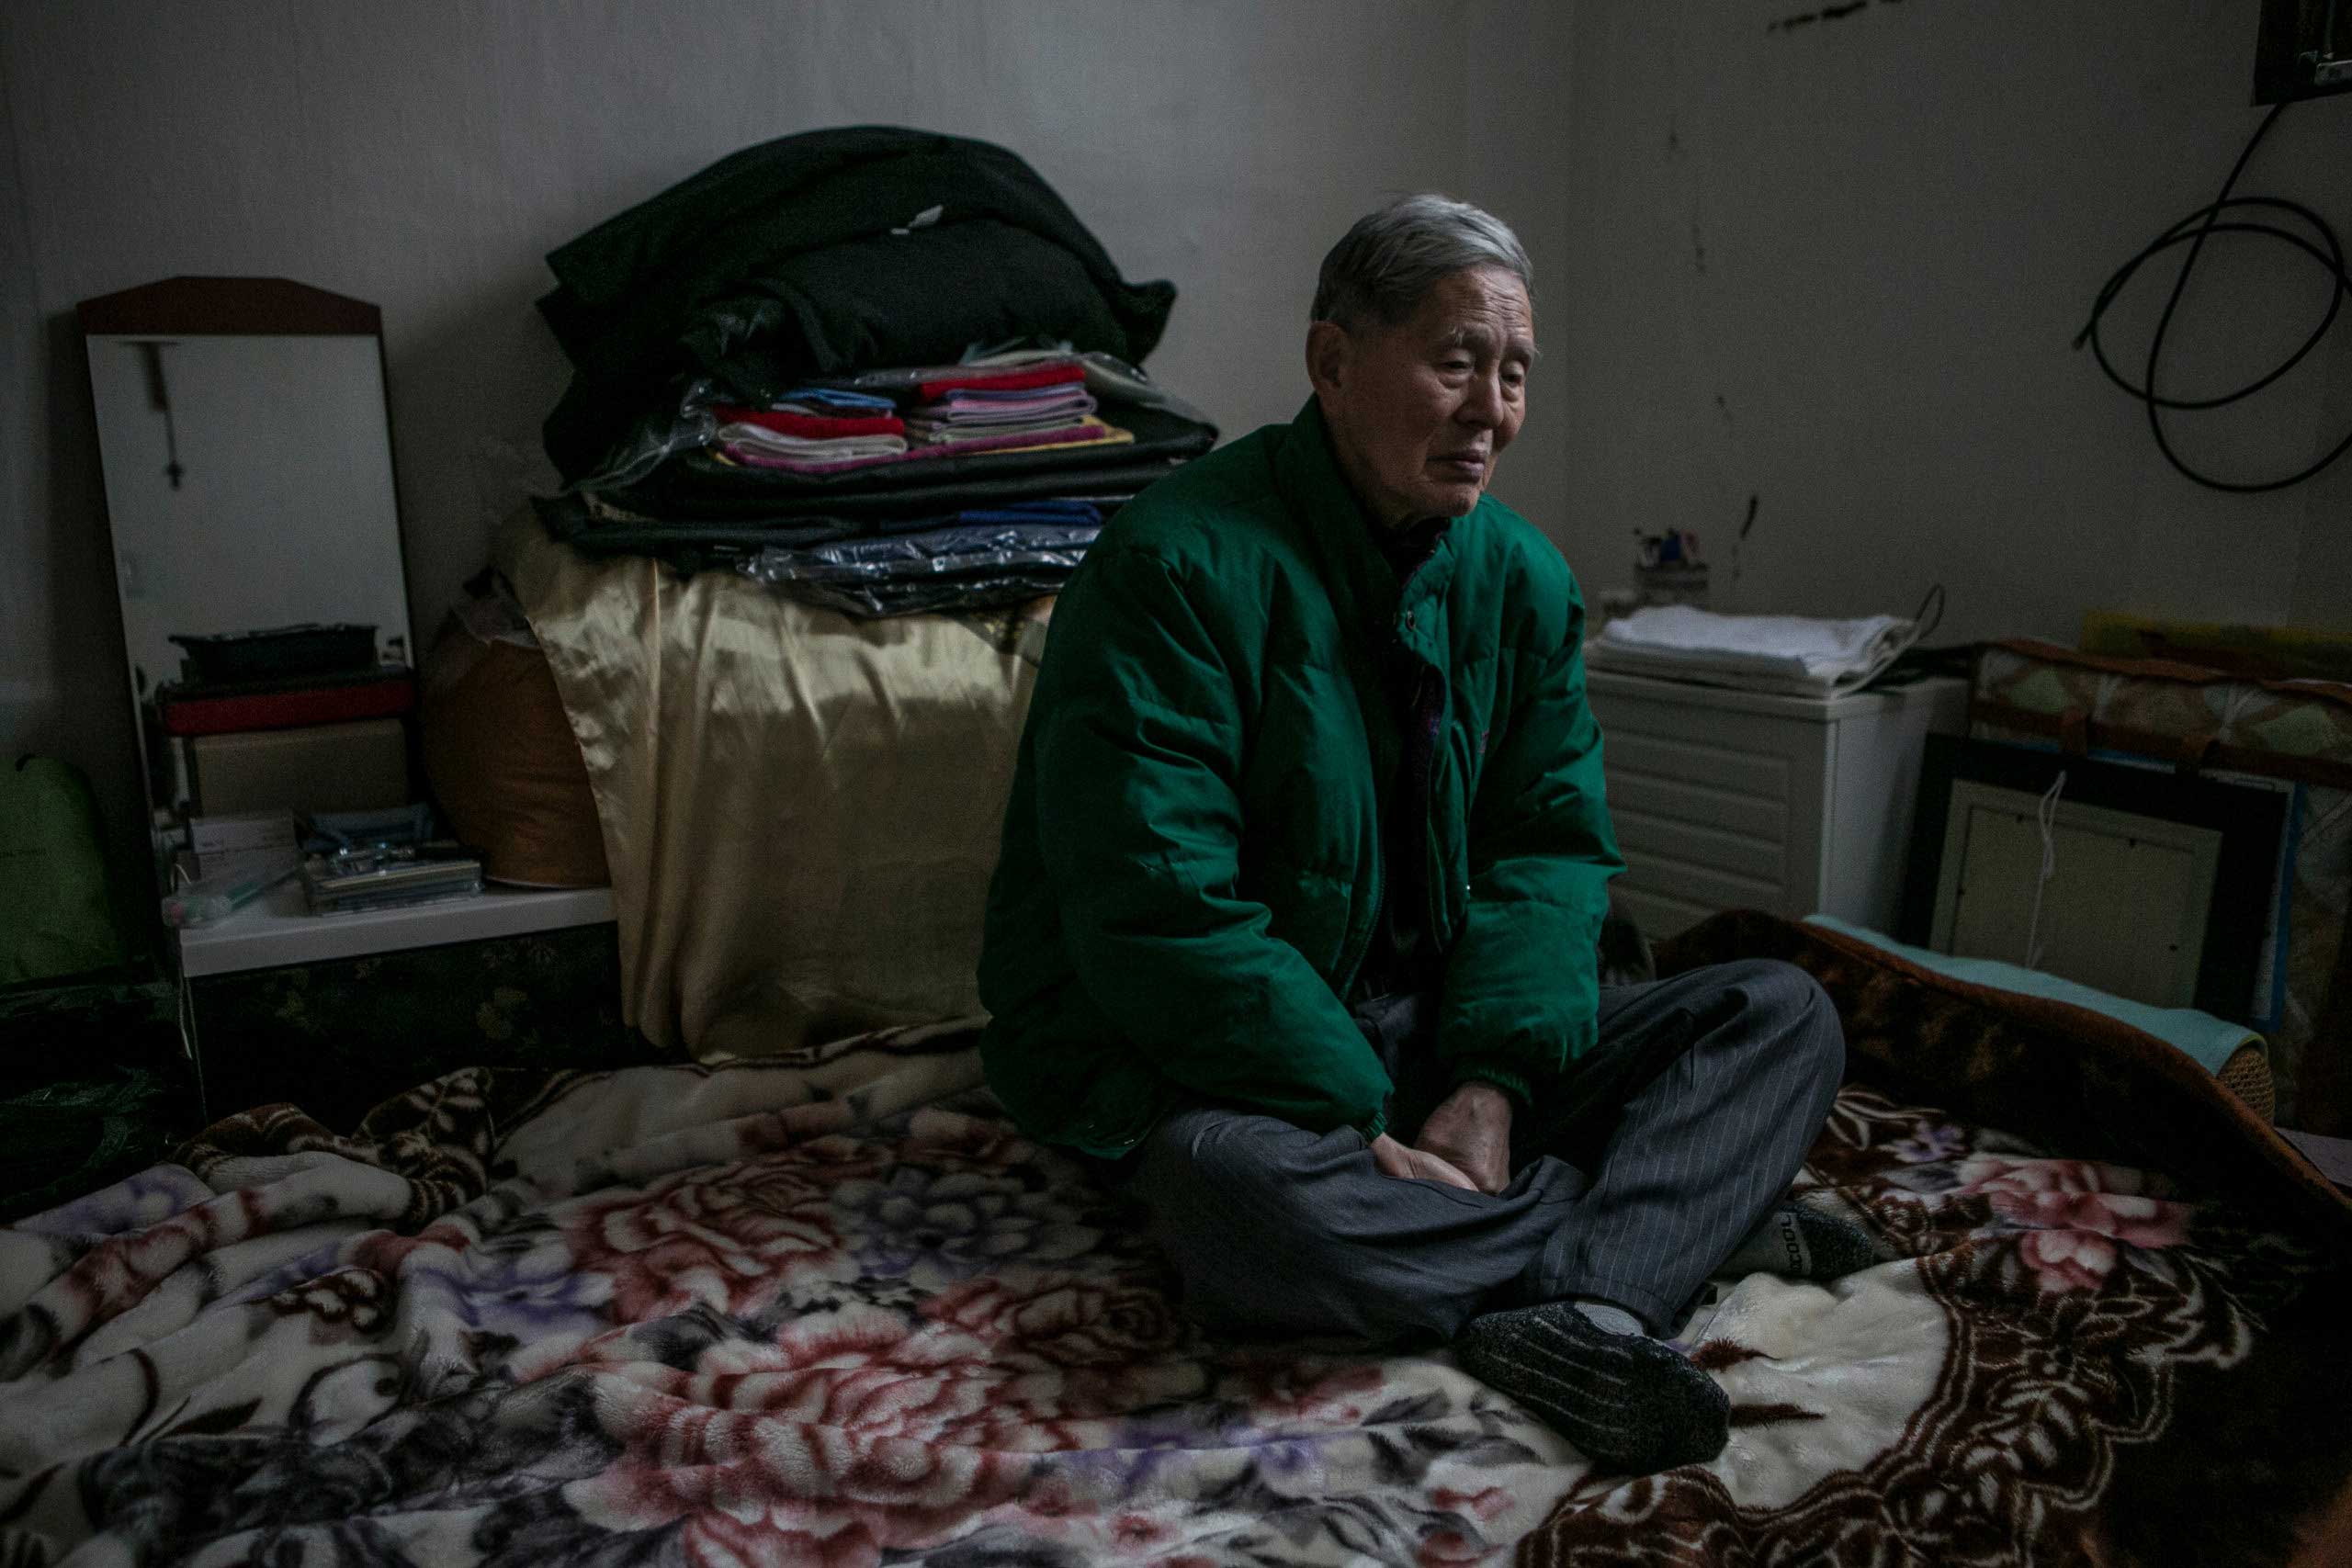 Ham Hak-joon sits in his one-room home on top of the hill in Jongro District, Seoul, South Korea in Dec. 27, 2014. Ham, an 86-year-old man who lives by himself, has been out of contact with two of his grown-up children for more than 30 years. He has arranged a funeral with Good Nanum when the time comes. (Jean Chung for TIME)